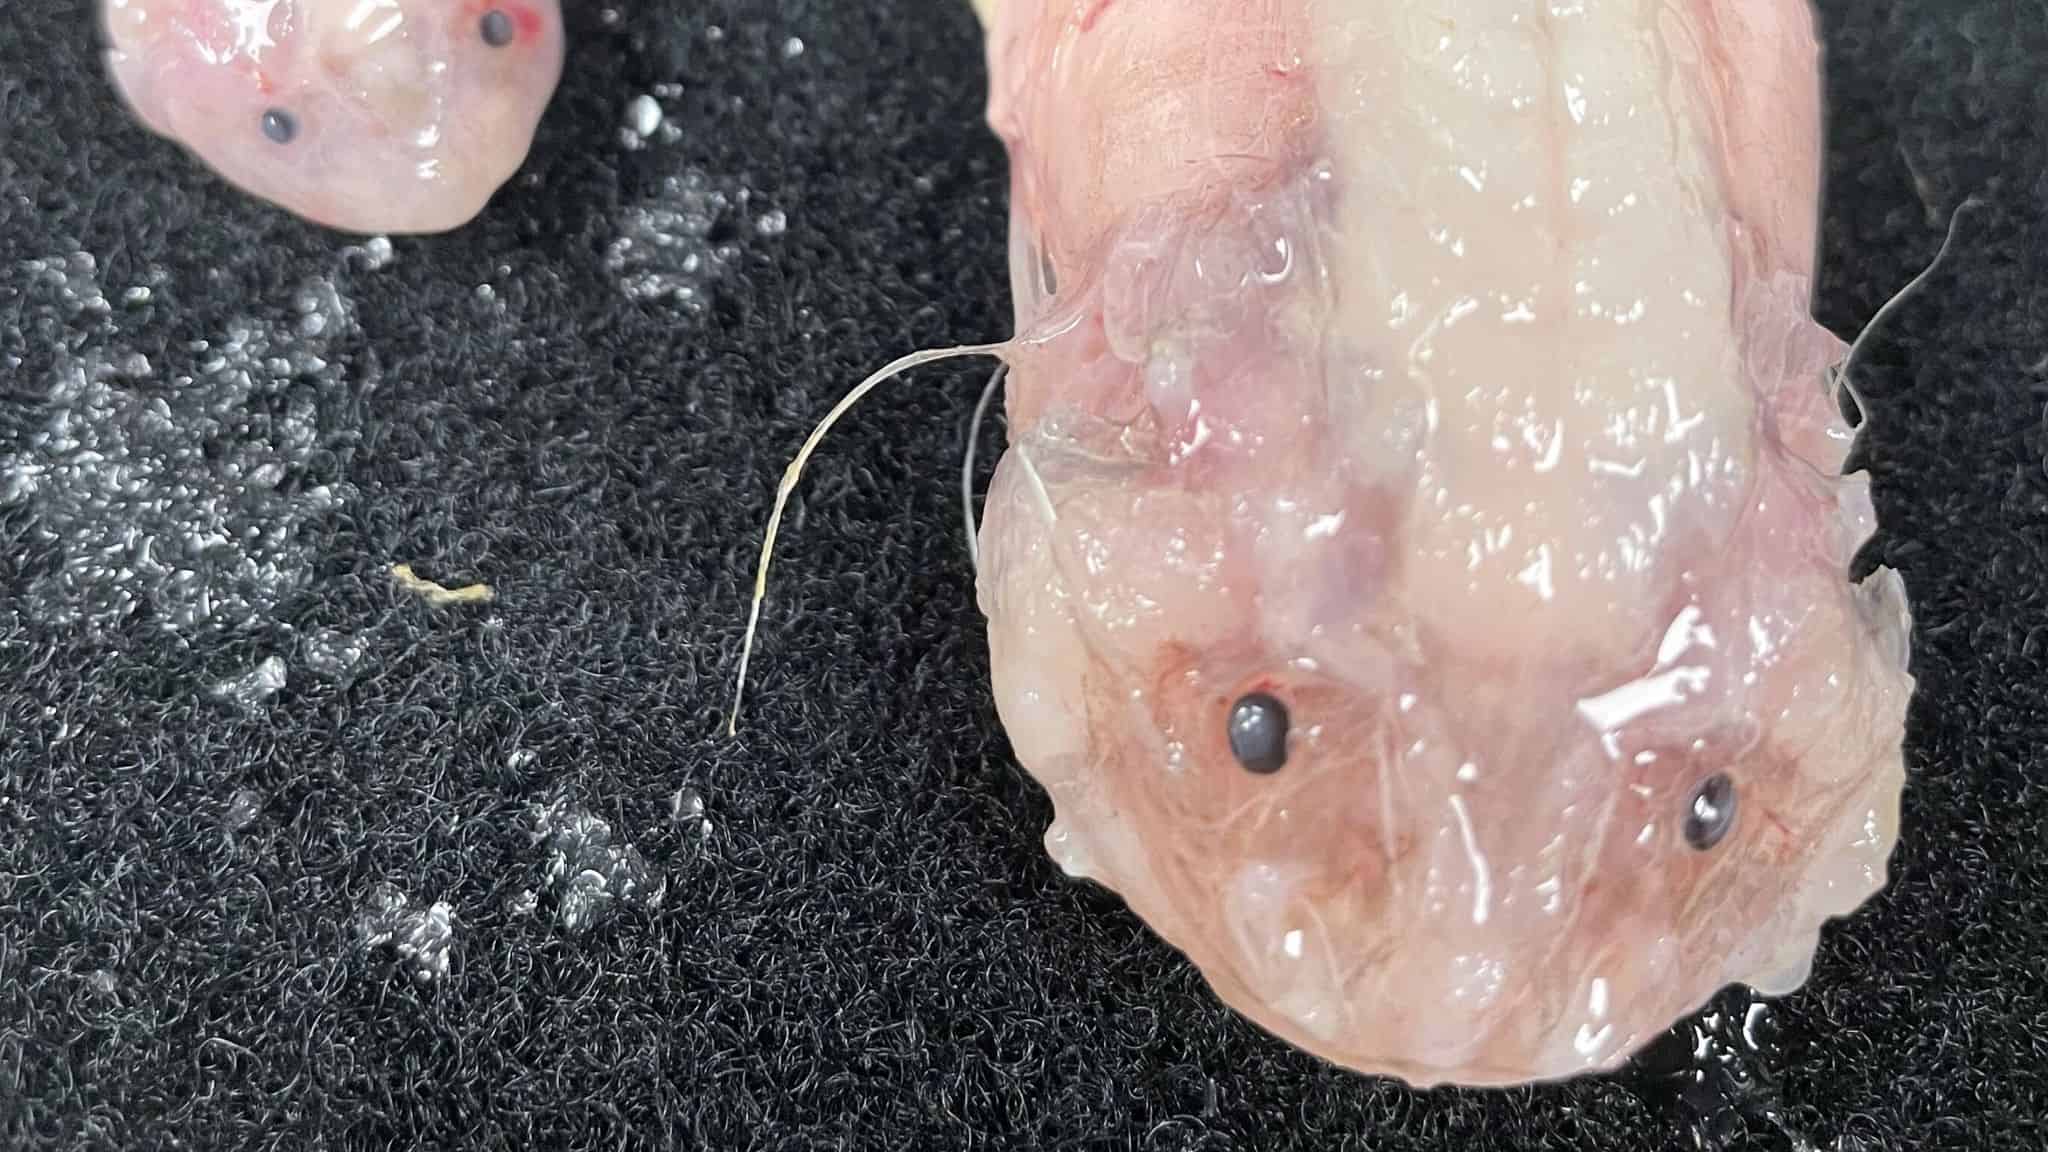 Deep dive discovery: researchers working in Japan’s waters discover the deepest fish ever recorded